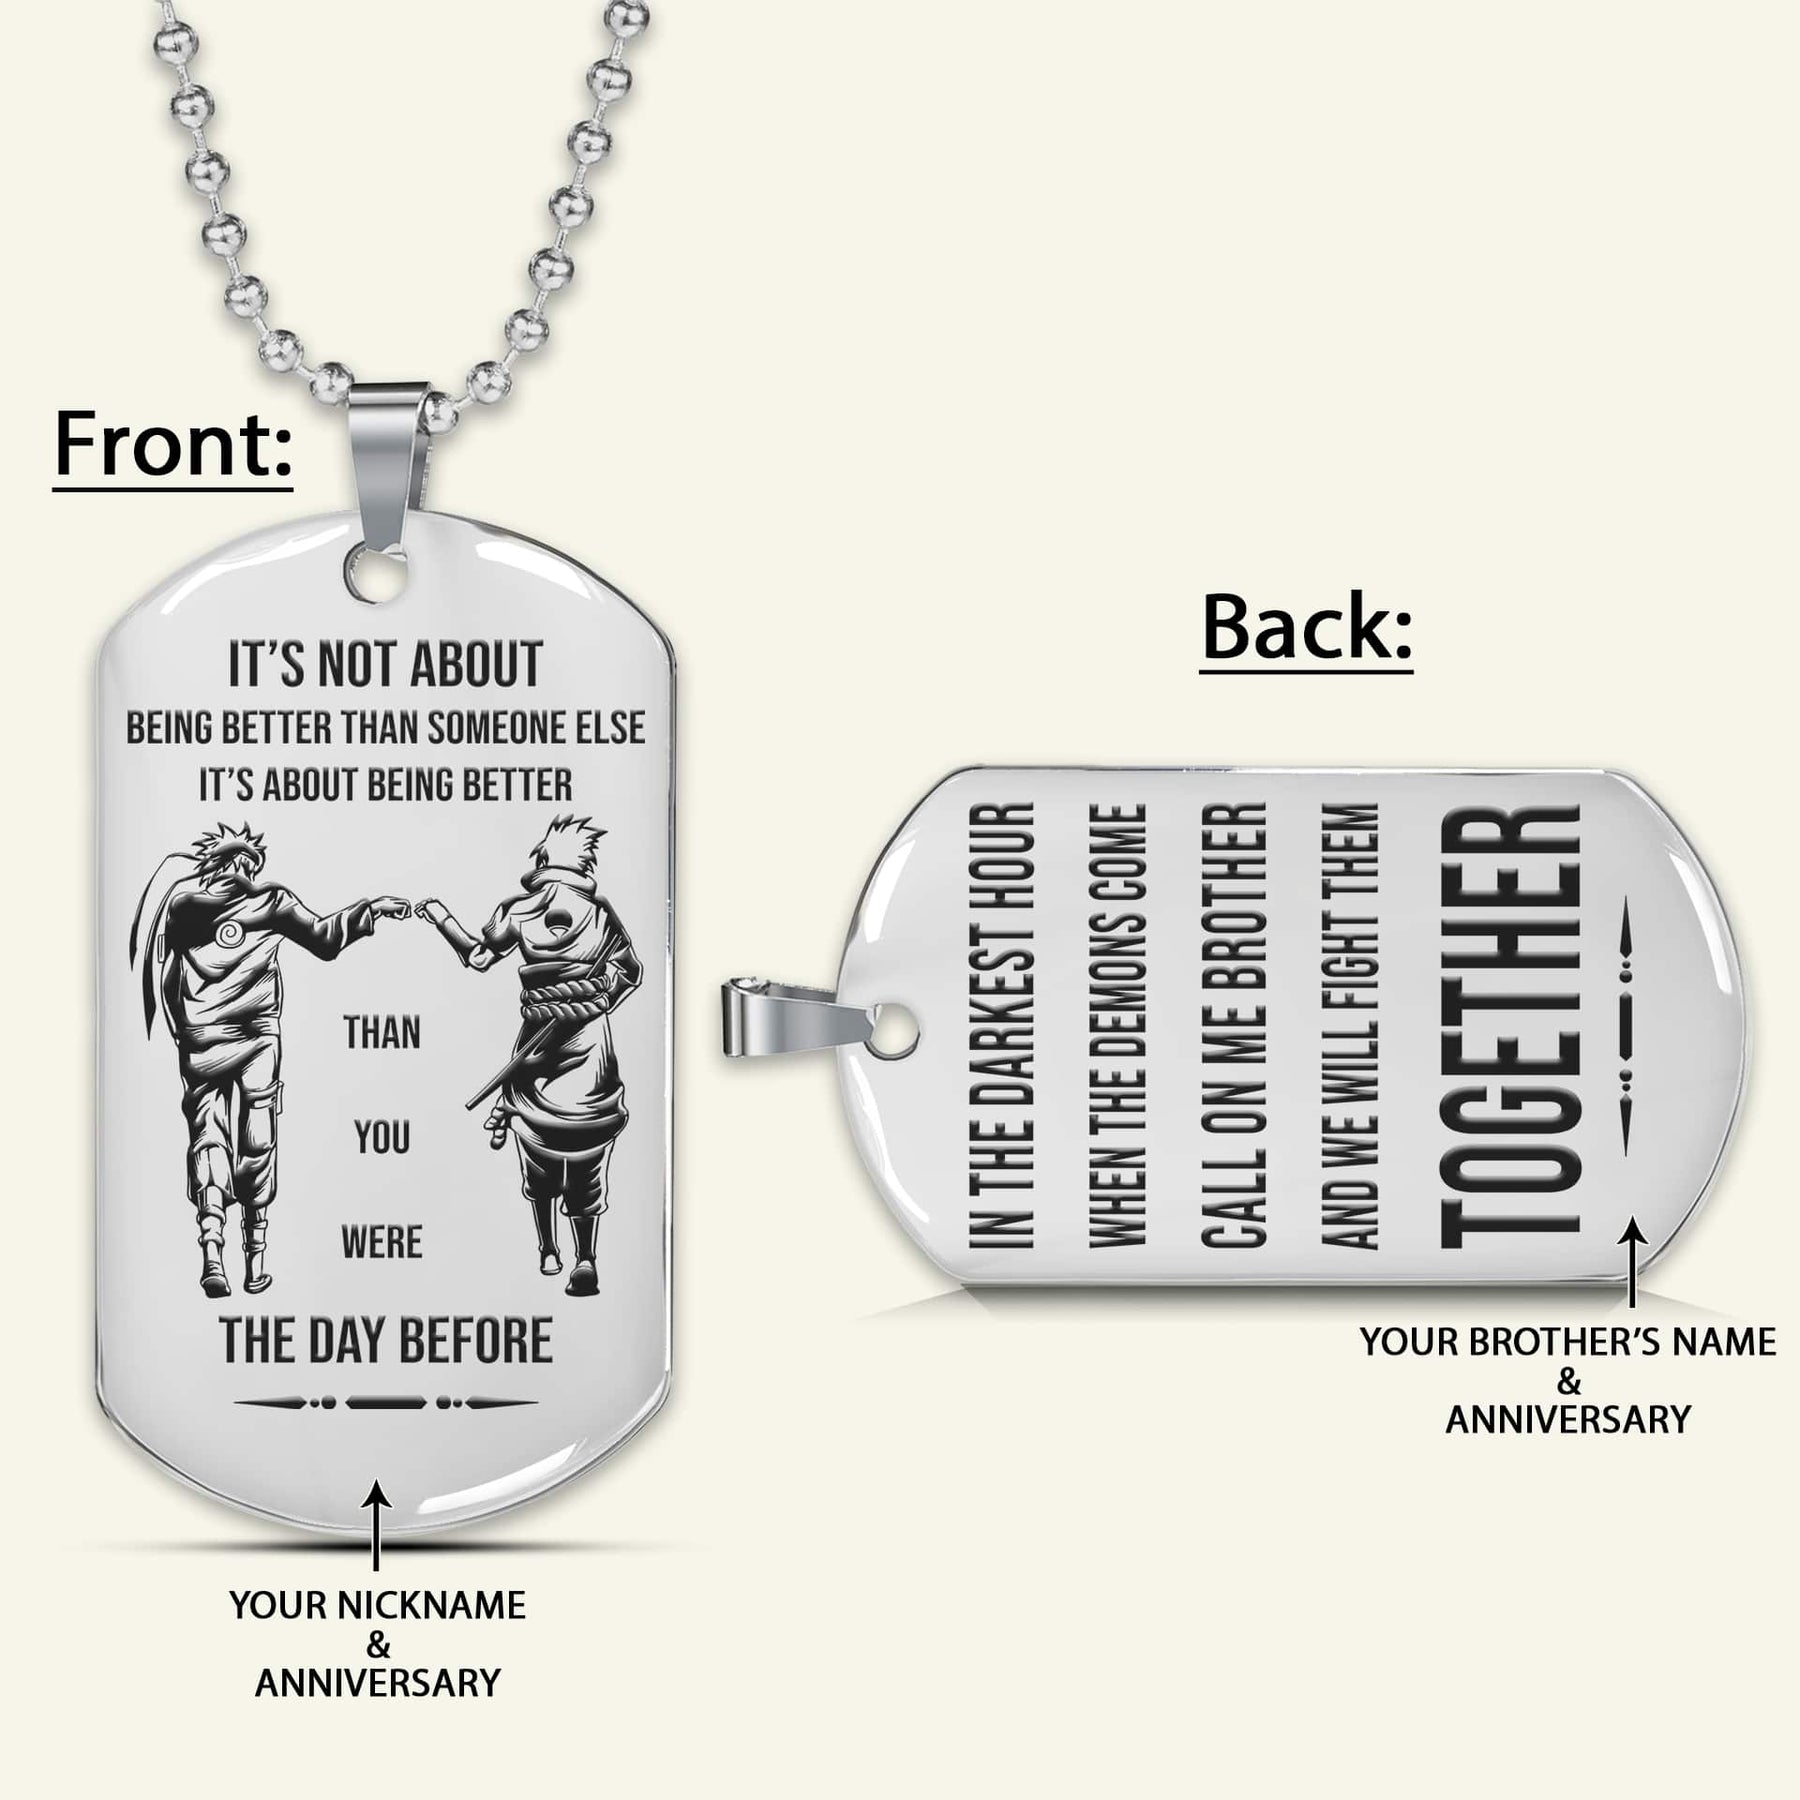 NAD022 - Call On Me Brother - It's About Being Better Than You Were The Day Before - Uzumaki Naruto - Uchiha Sasuke - Naruto Dog Tag - Engrave Double Side Silver Dog Tag